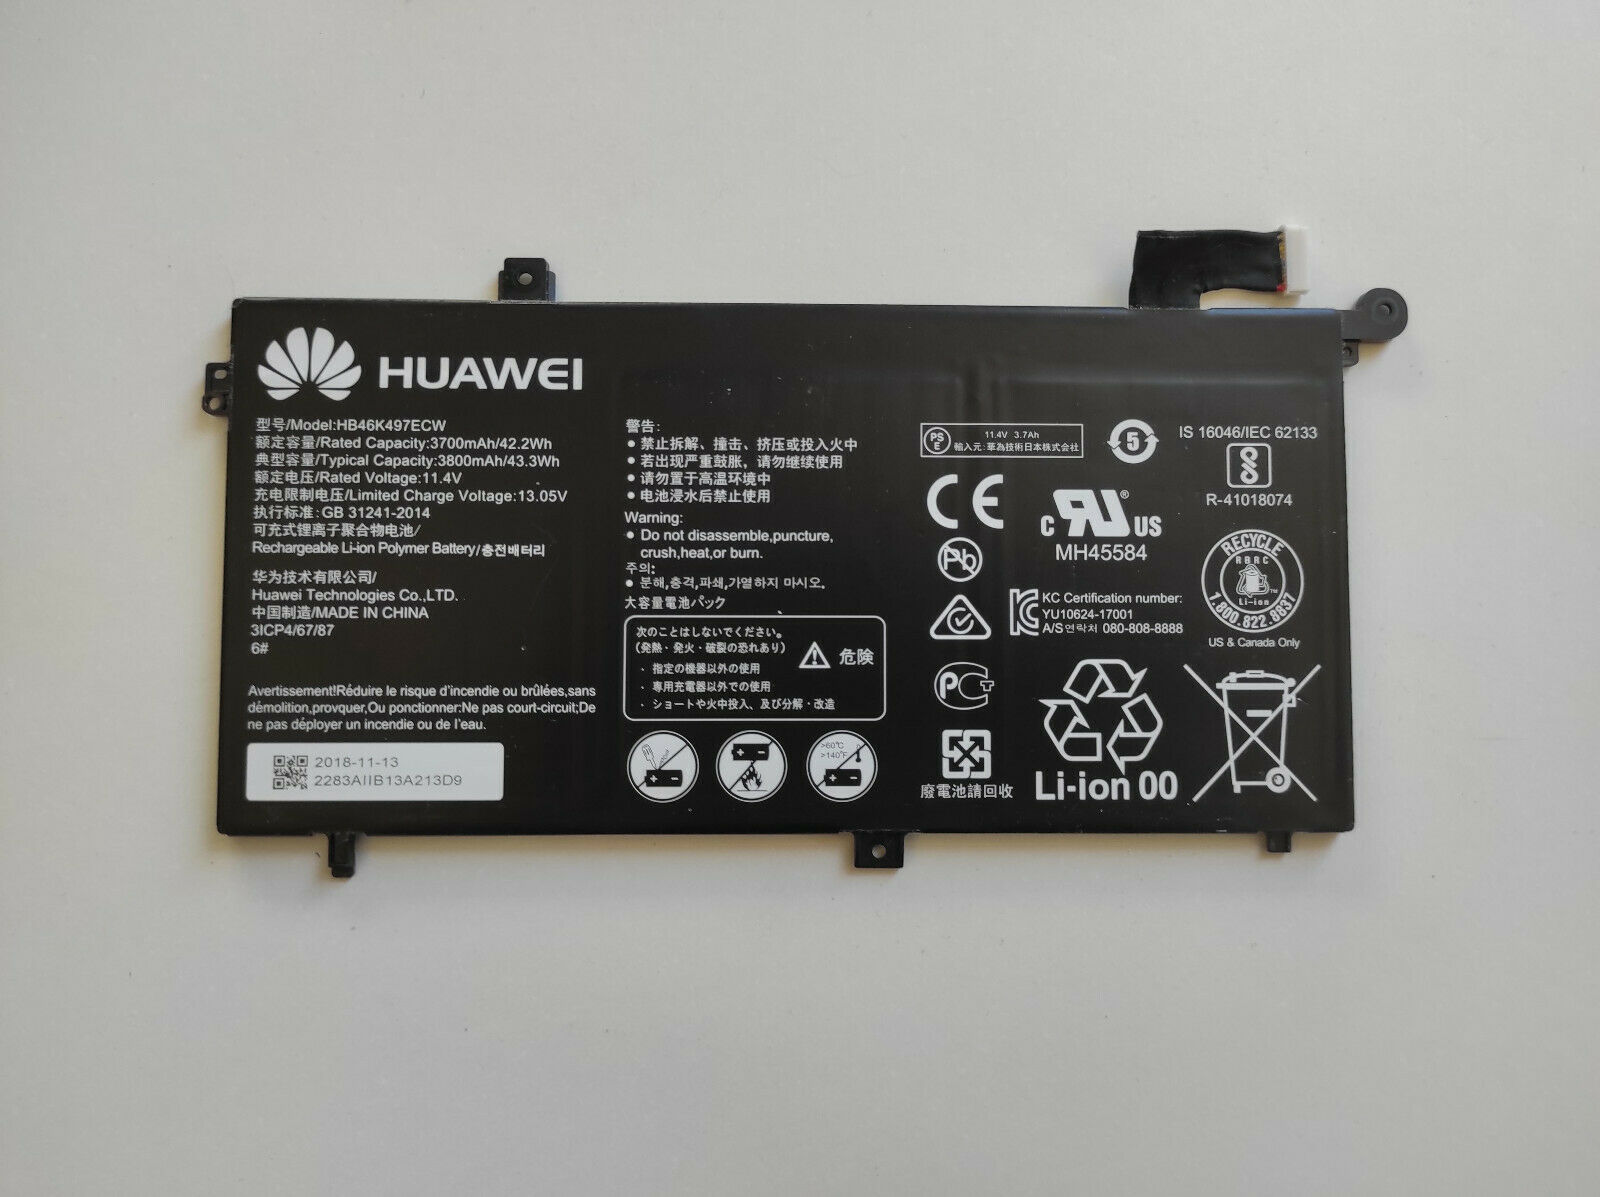 42.2Wh Huawei Matebook PL-W19 Battery - Click Image to Close